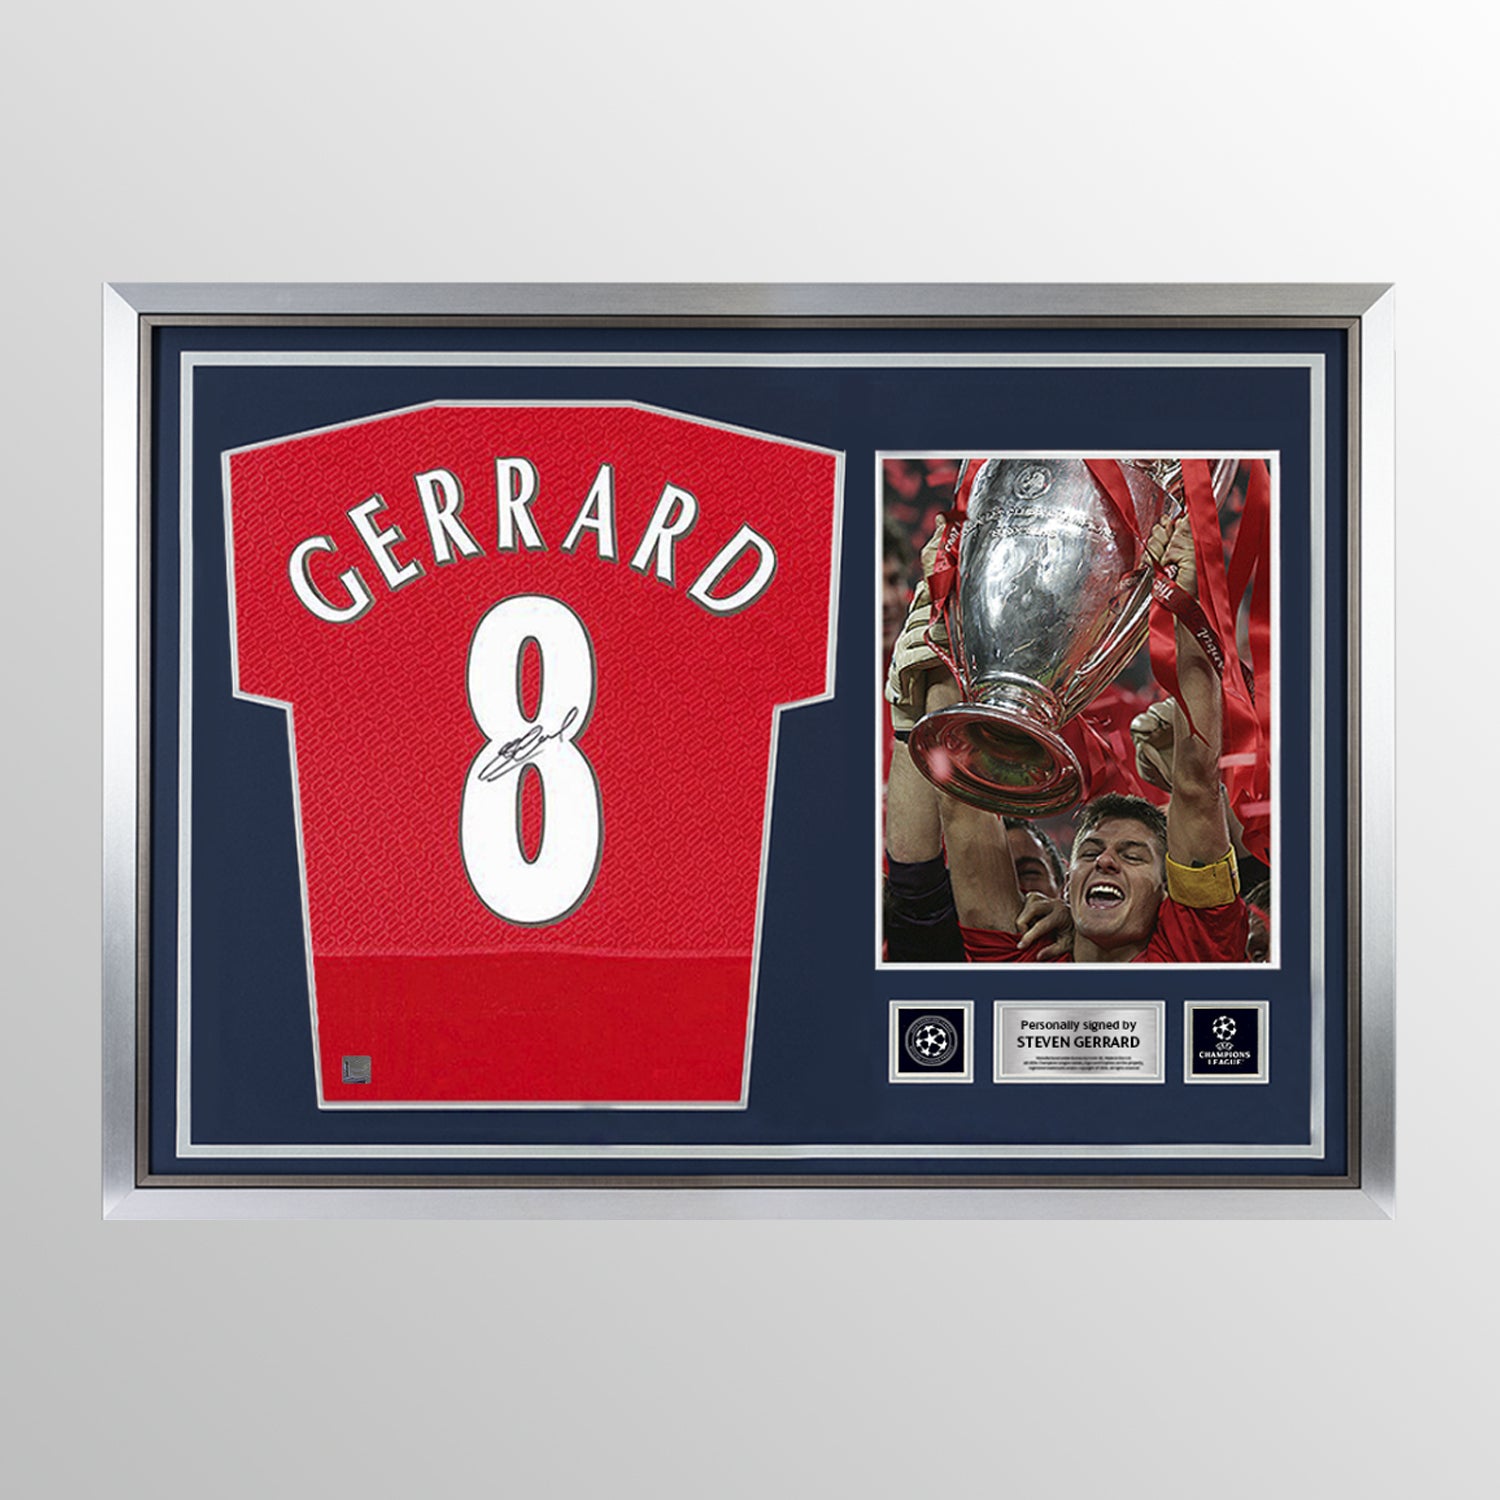 Steven Gerrard Official UEFA Champions League Back Signed and Hero Framed Liverpool 2005 Home Shirt UEFA Club Competitions Online Store